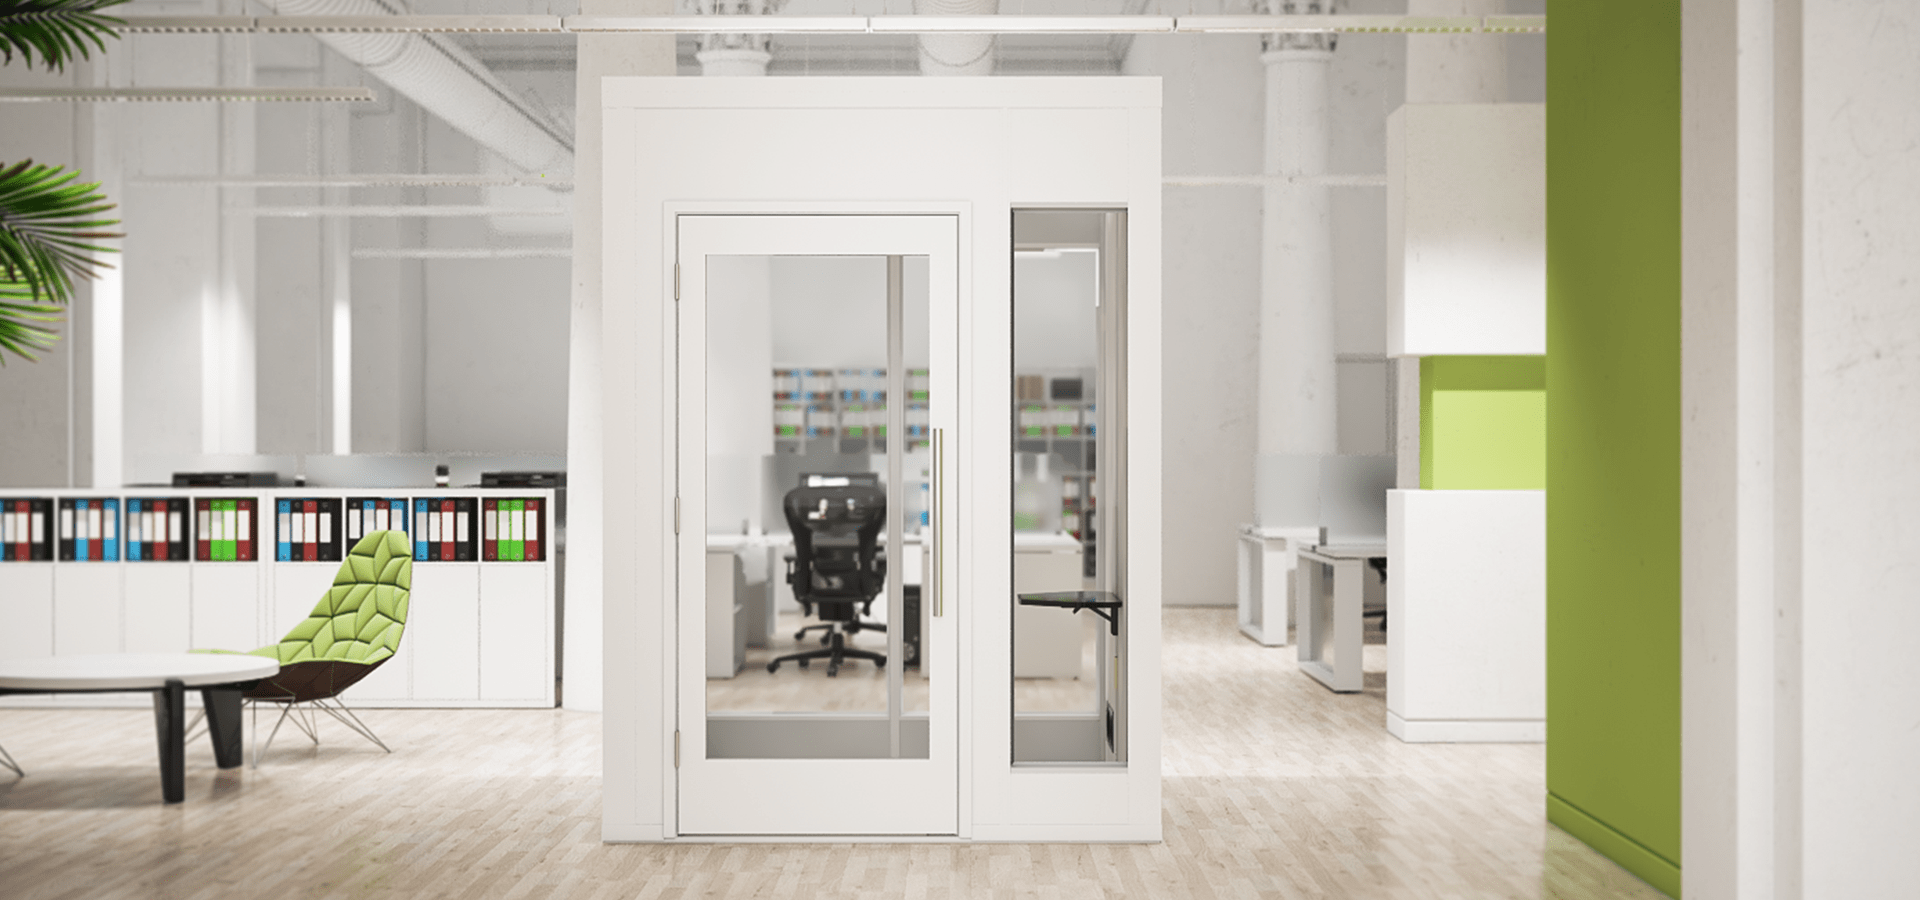 Soundproof Booth or Soundproof Pods